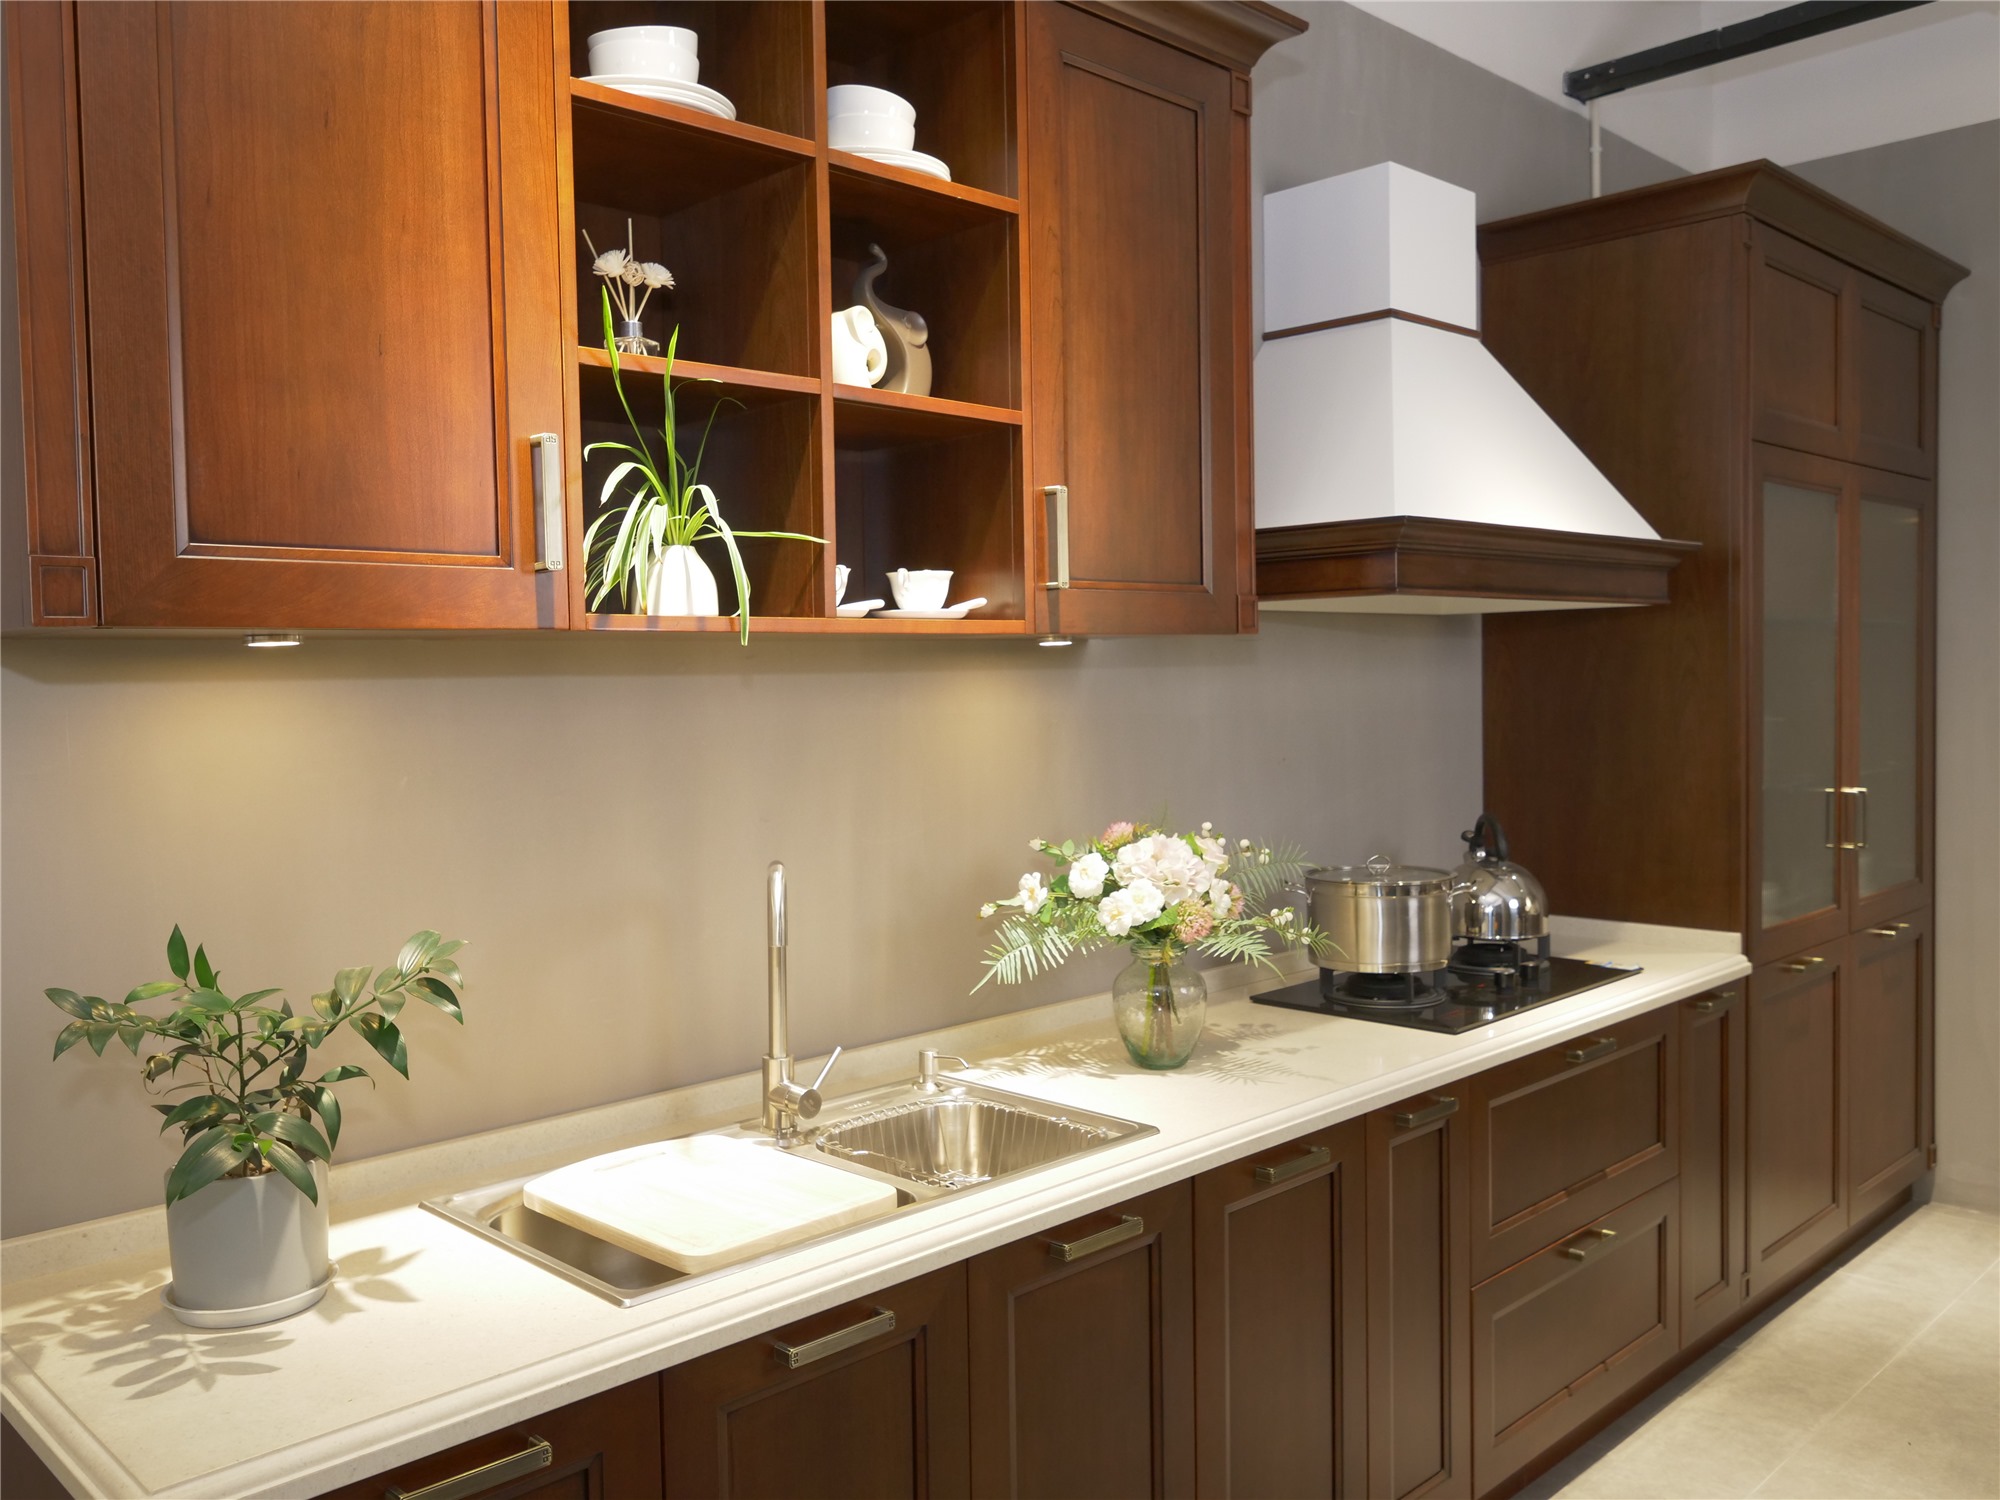 AisDecor cherry wood cabinets from China